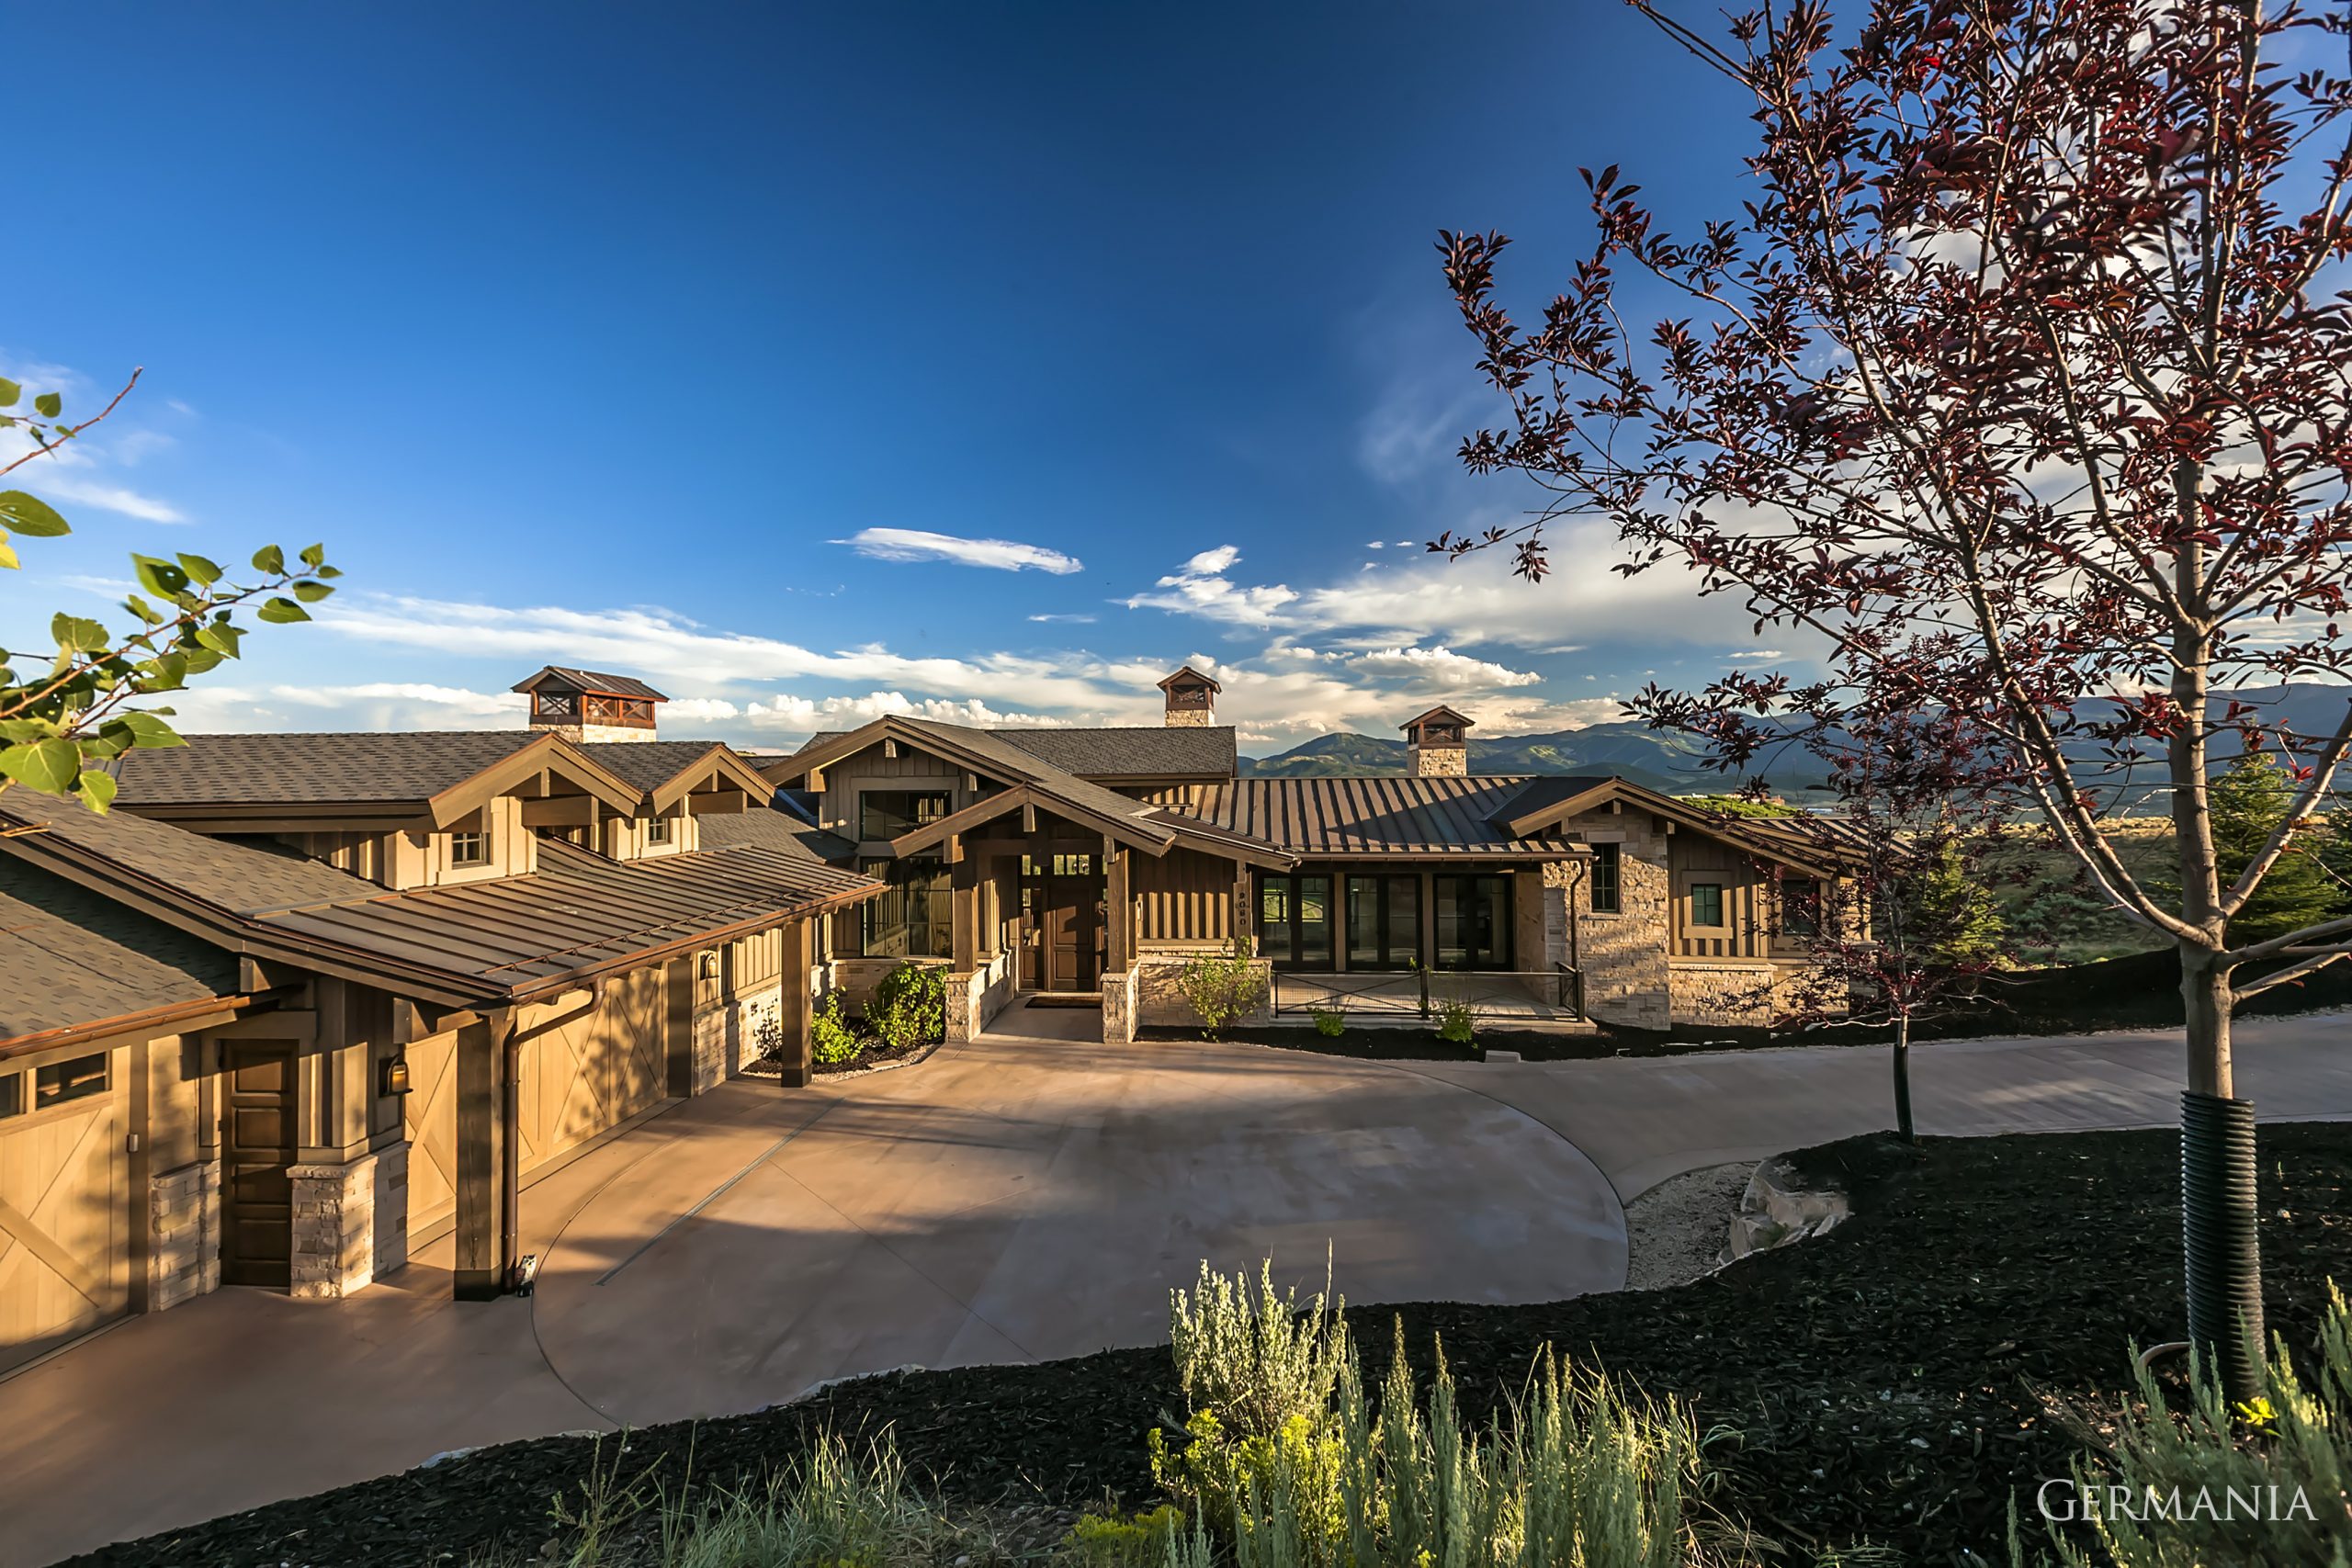 Interested in building your dream house? Germania Construction specializes and has mastered the luxury home living process. From exterior views to incredible interior designs, Germania brings luxury home living to life.